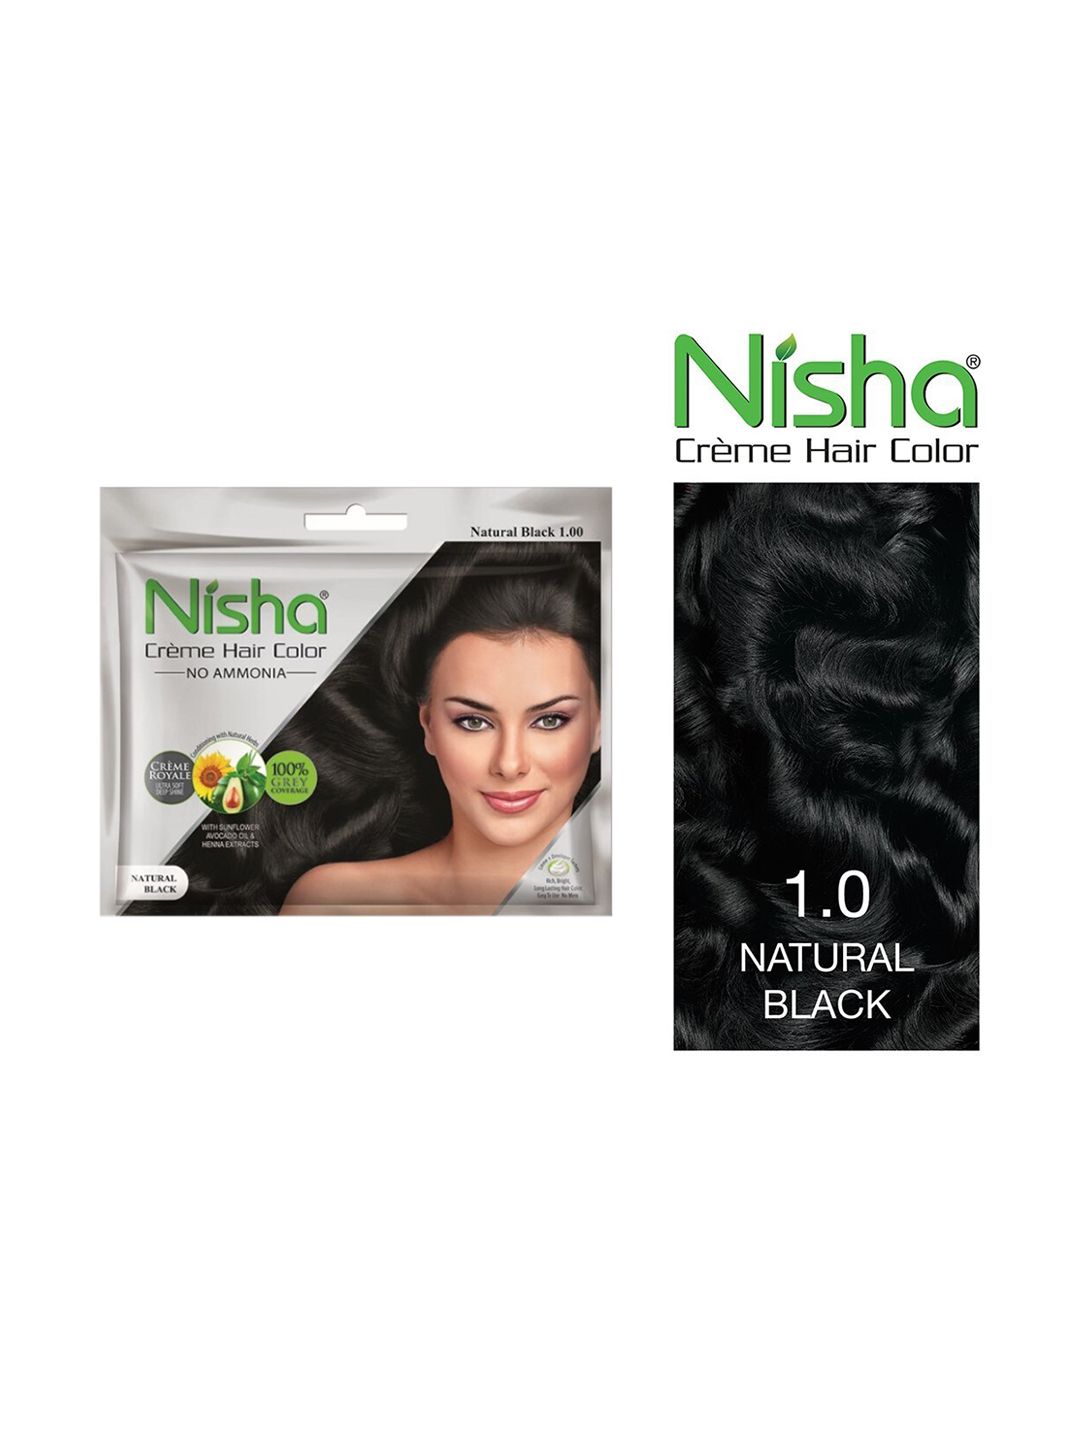 Nisha Women Brown Pack of 6 Creme Hair Color 40gm each- Natural Black Price in India